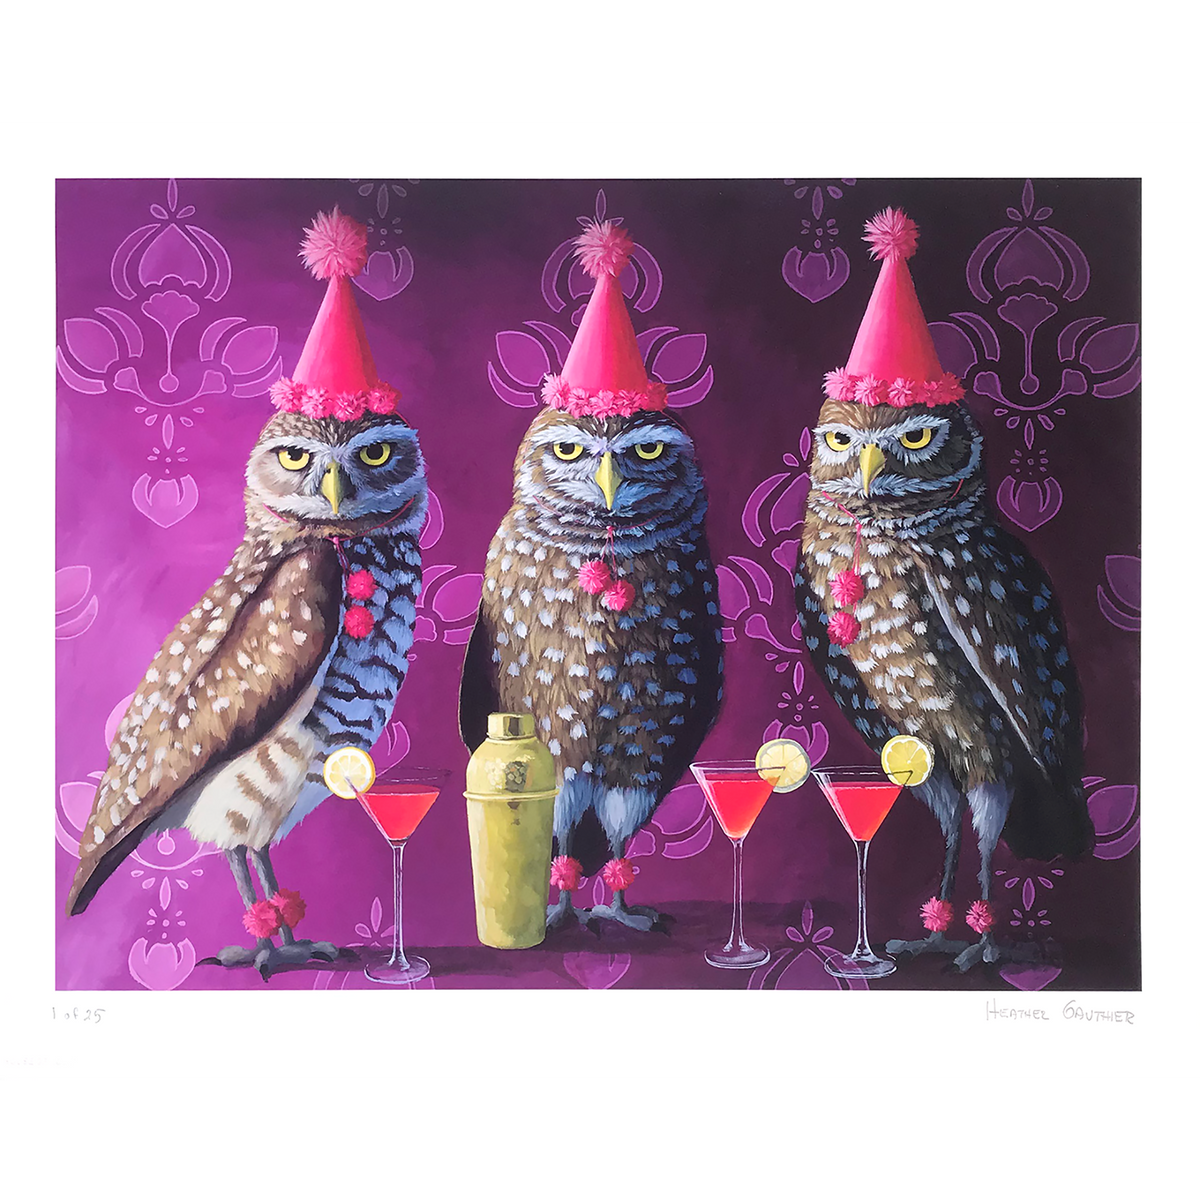 Heather Gauthier &quot;Party Owls&quot; - Archival Print, Limited Edition of 25 - 16 x 20&quot;